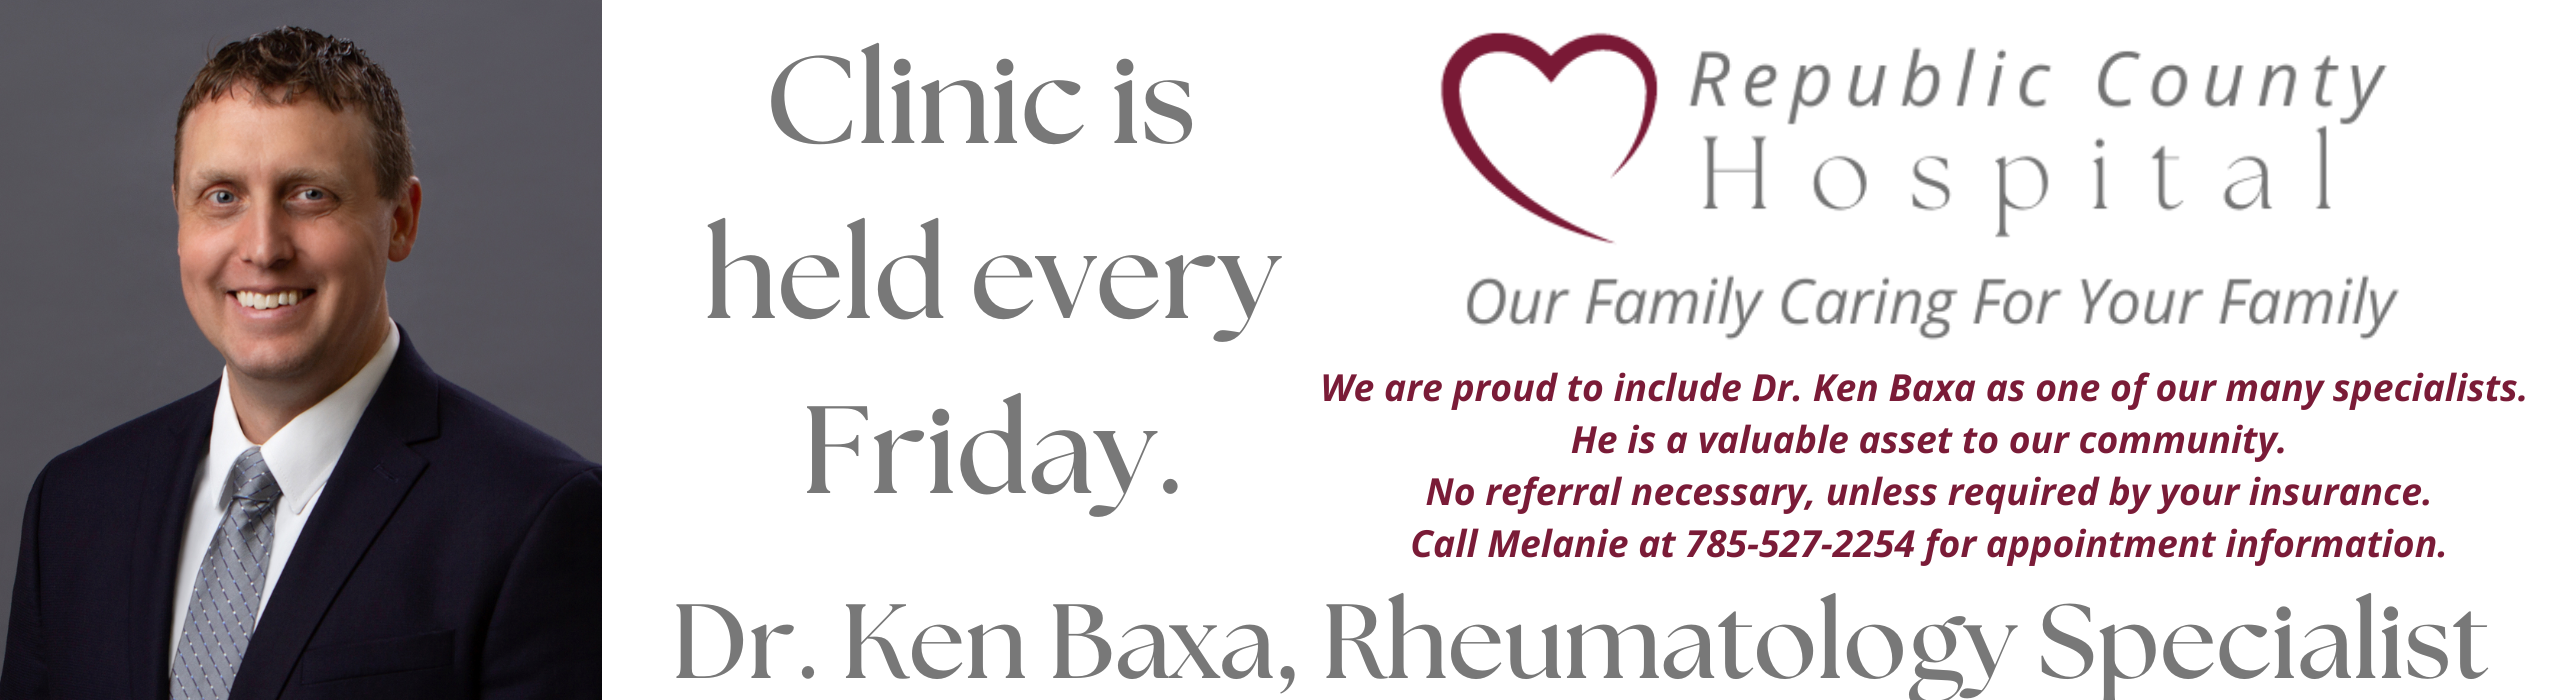 Banner picture of Dr Ken Baxa, Rheumatology Specialist. Banner says:
Now Holding Clinic every Friday 
Dr. Ken Bexa, Rheumatology Specialist.

Republic County HOSPITAL
We are proud to include Dr. Ken Baxa as one of our many specialists. He is a valuable asset to our community. No referral necessary, unless required by your insurance. Call Melanie at 785-527-2254 for appointment information.